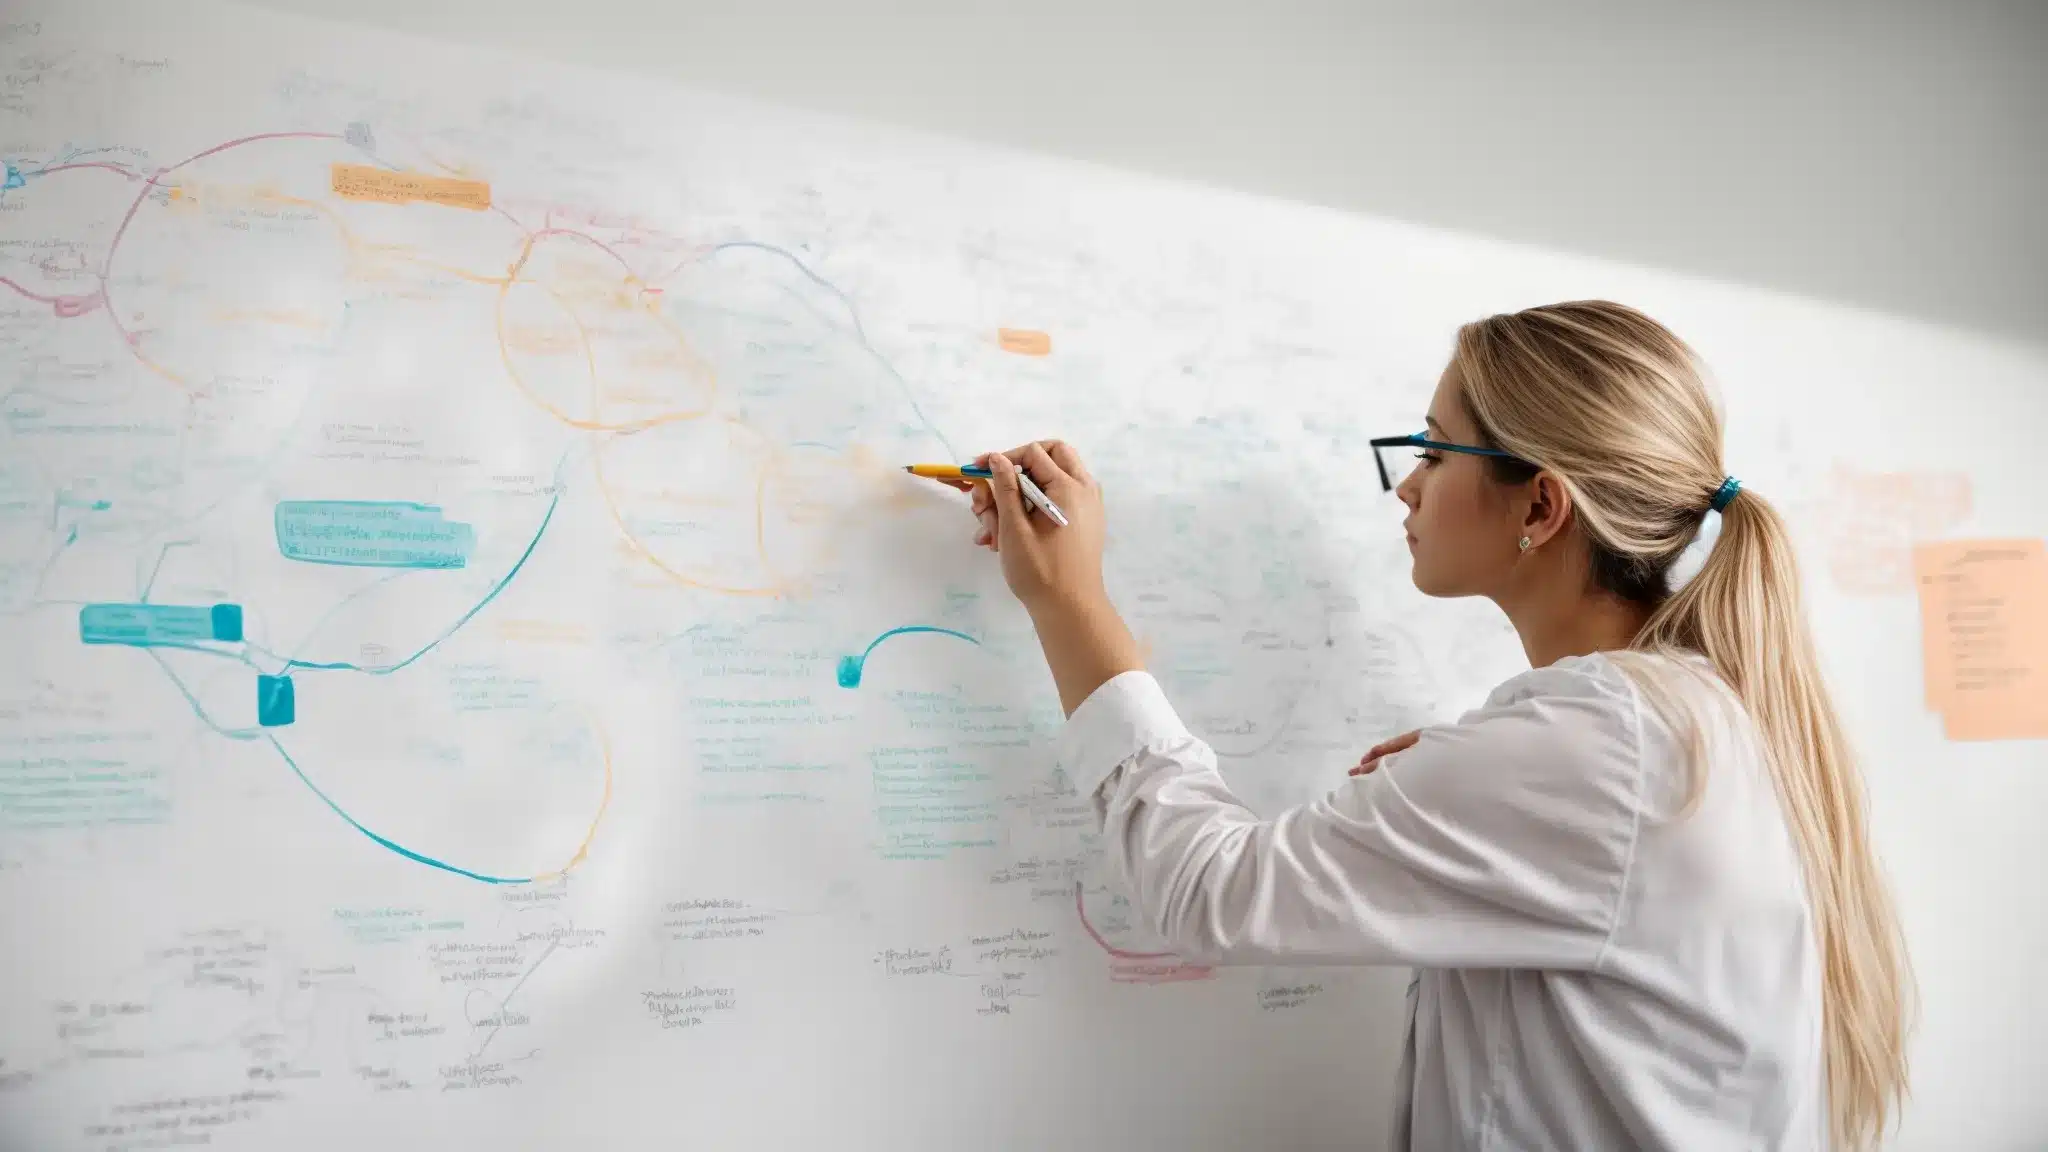 A Focused Individual Sketches A Vibrant Mind Map On A Large Whiteboard, Symbolizing Strategic Planning For Brand Identity.